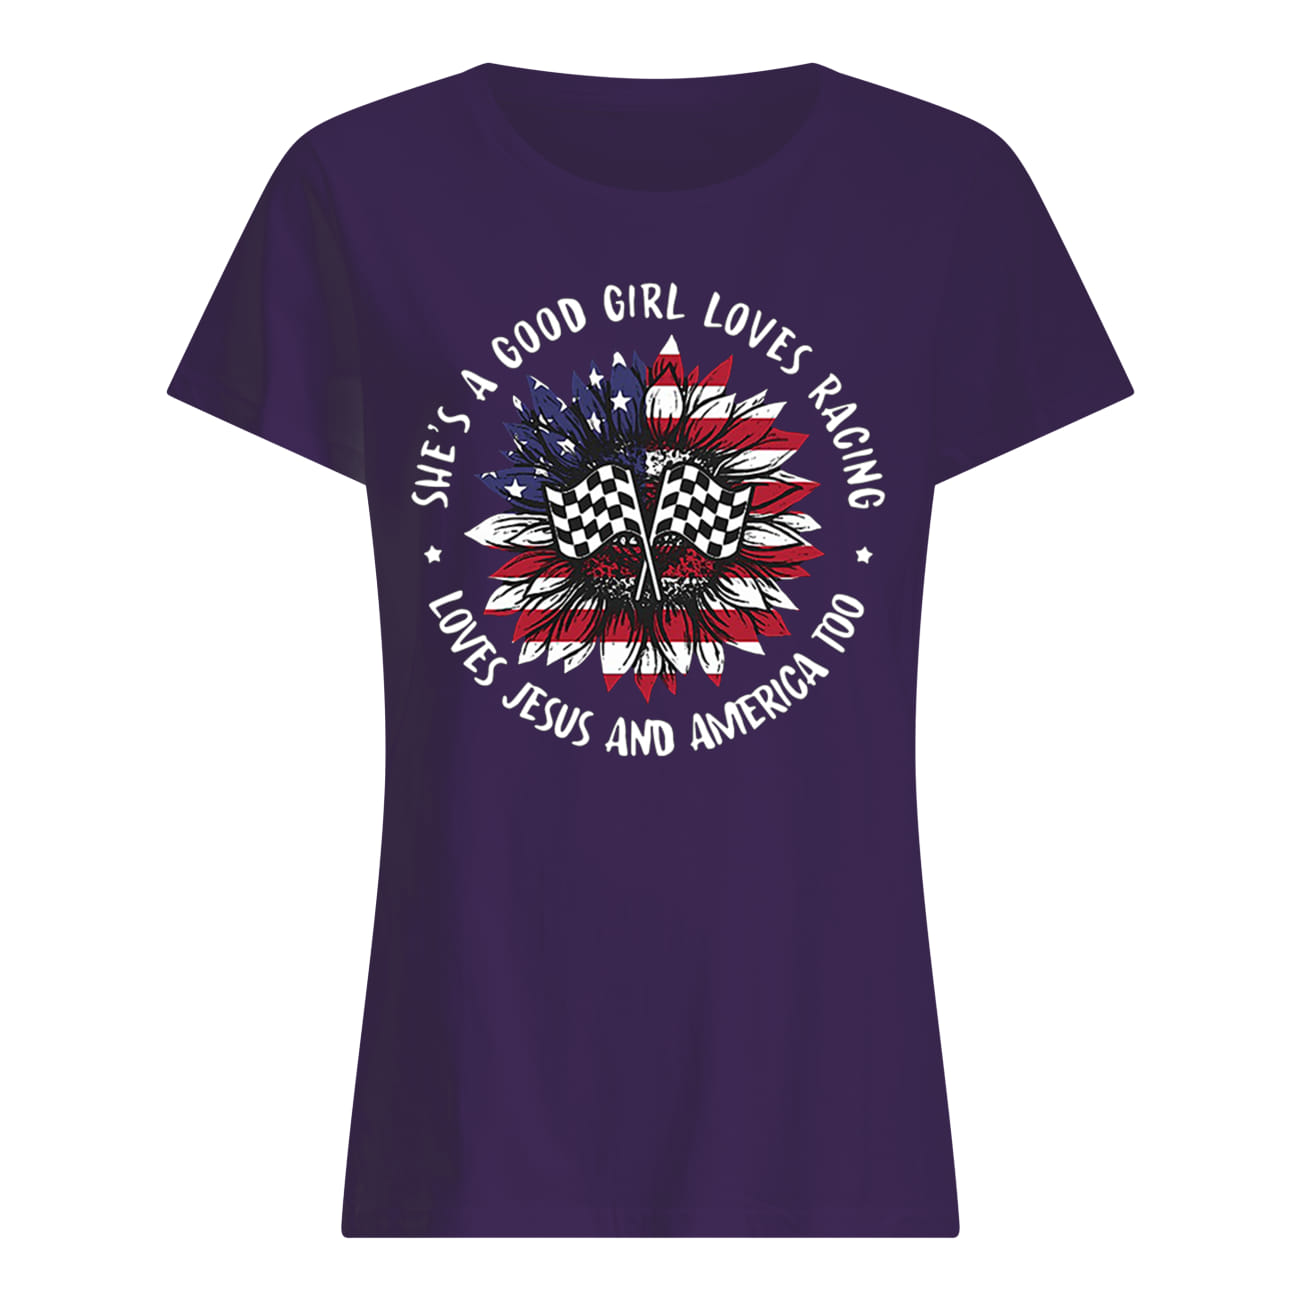 Hippie sunflower usa flag she is a good girl loves her mama loves jesus and america too lady shirt